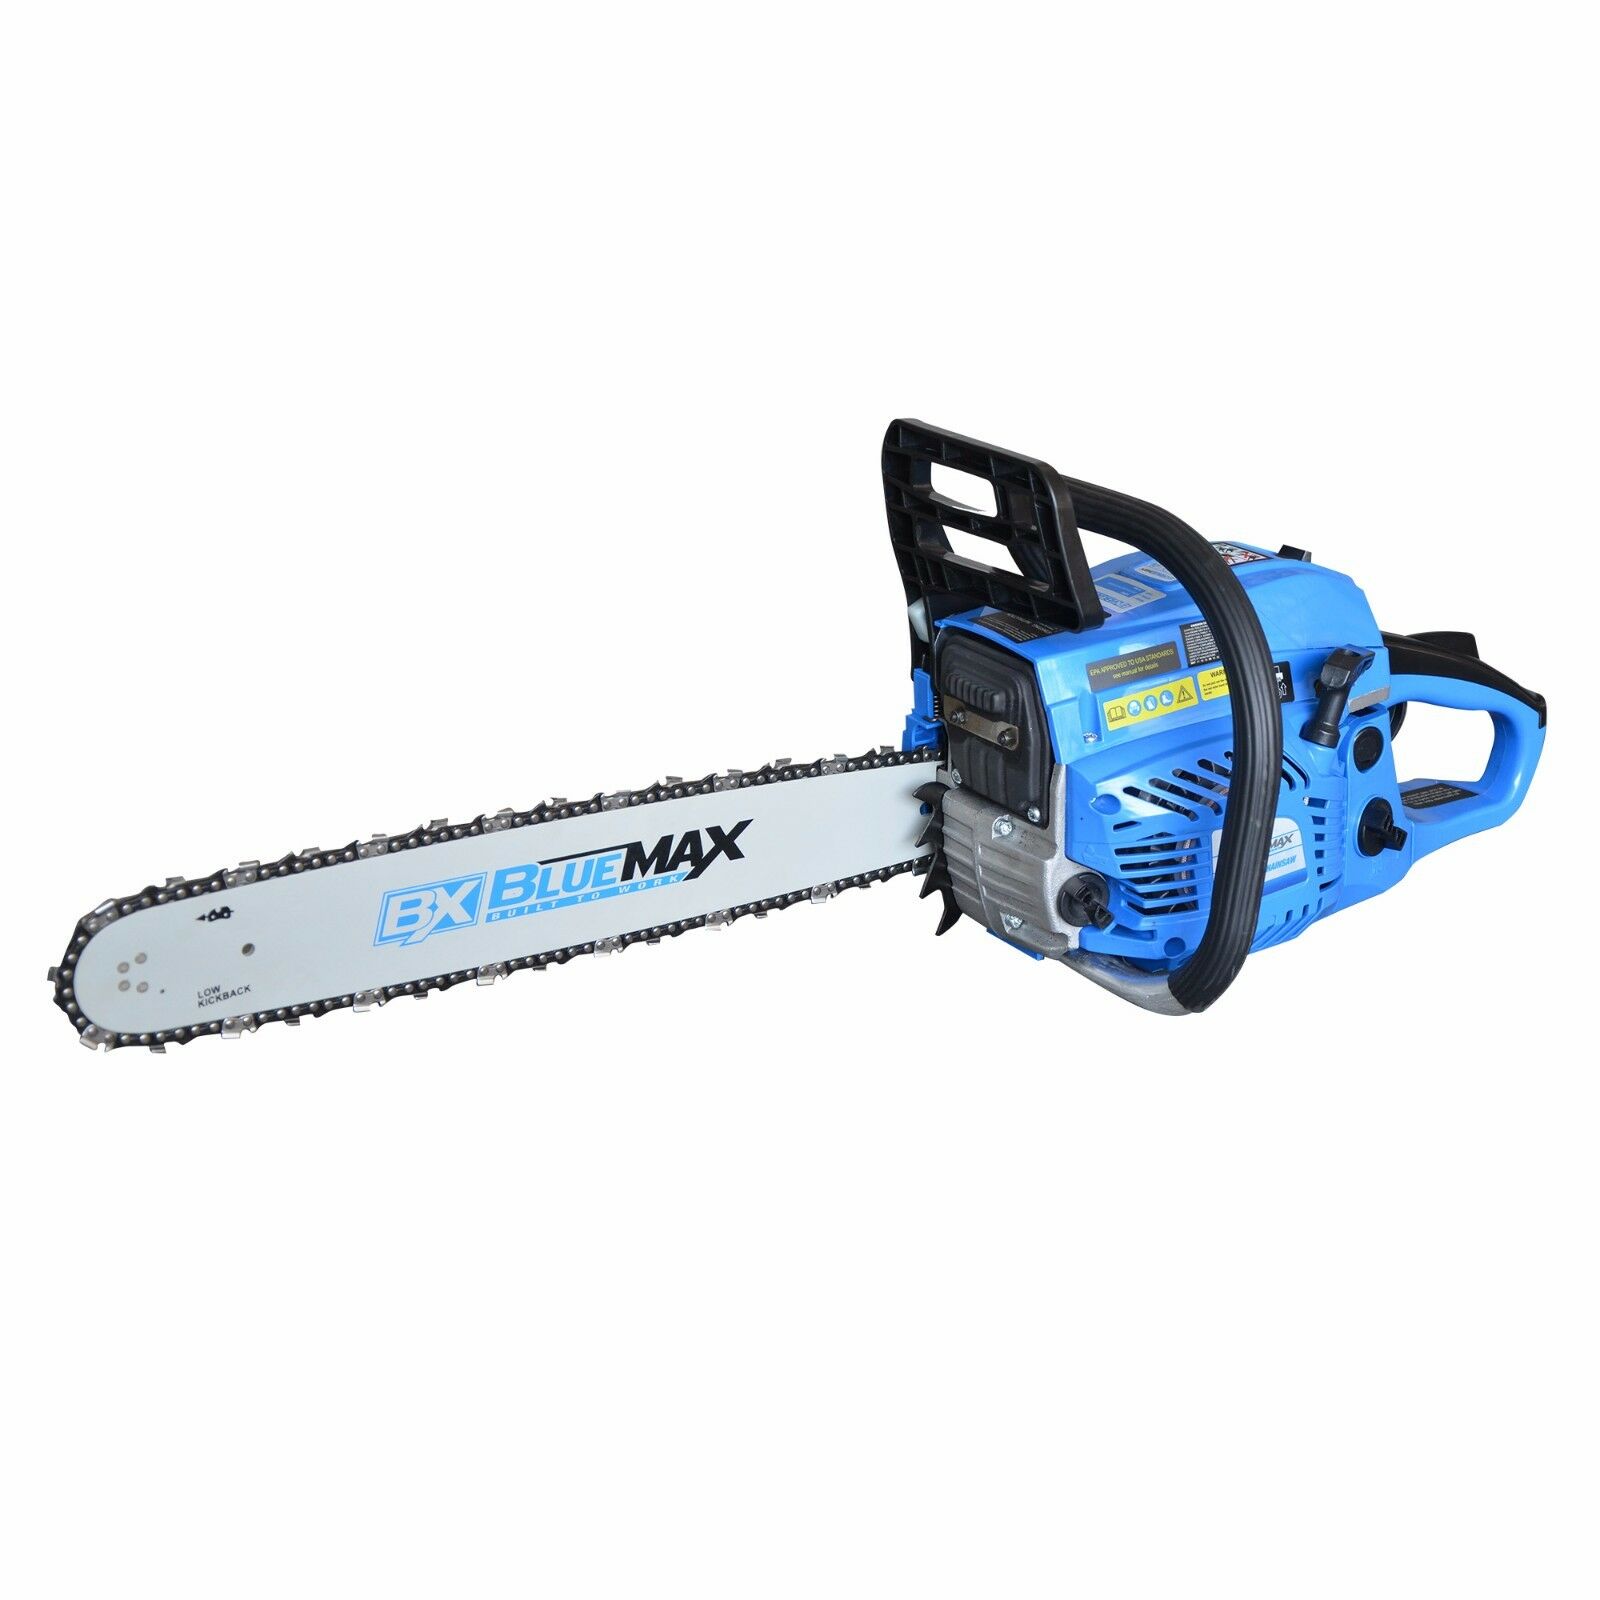 Blue Max 20" 51.5cc Gas Powered Heavy Duty Chainsaw Epa Approved 53543